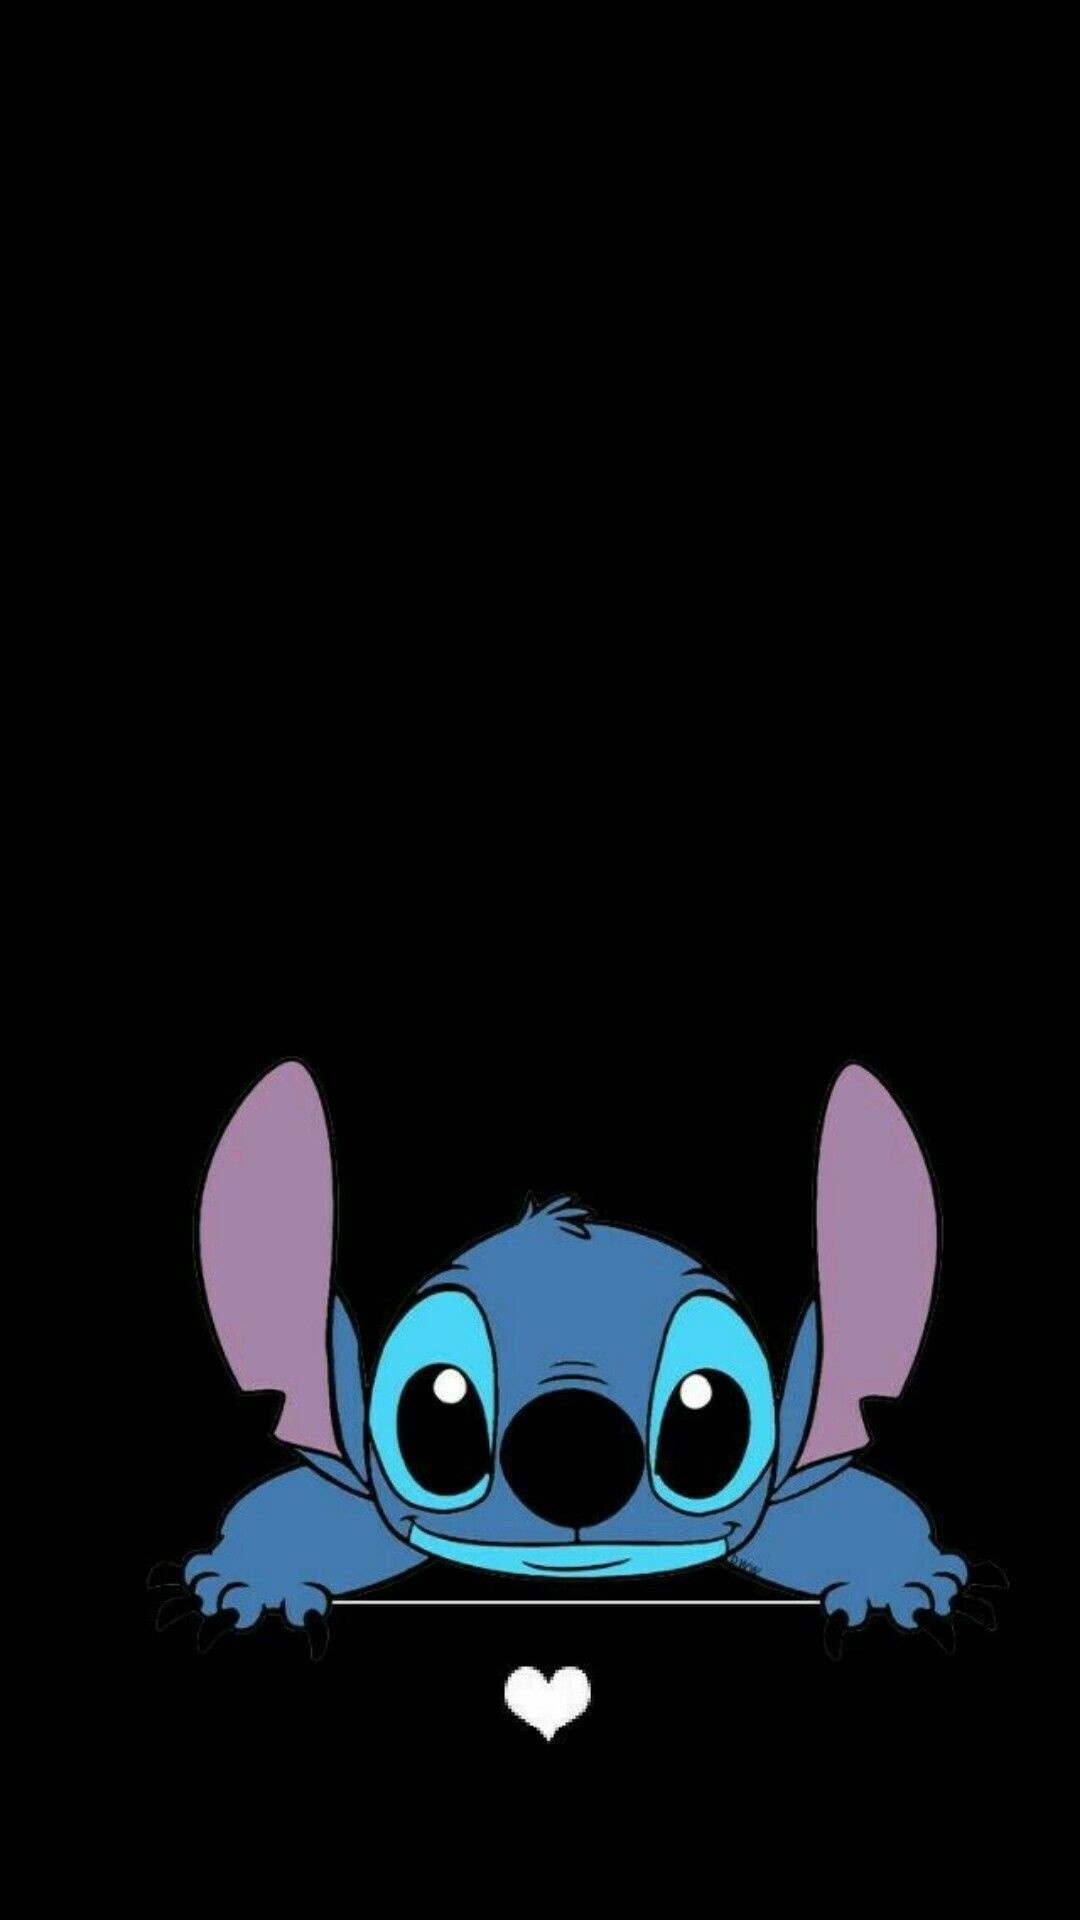 Stitch animation, Stitch iPhone wallpapers, Adorable blue creature, Fan art, 1080x1920 Full HD Phone